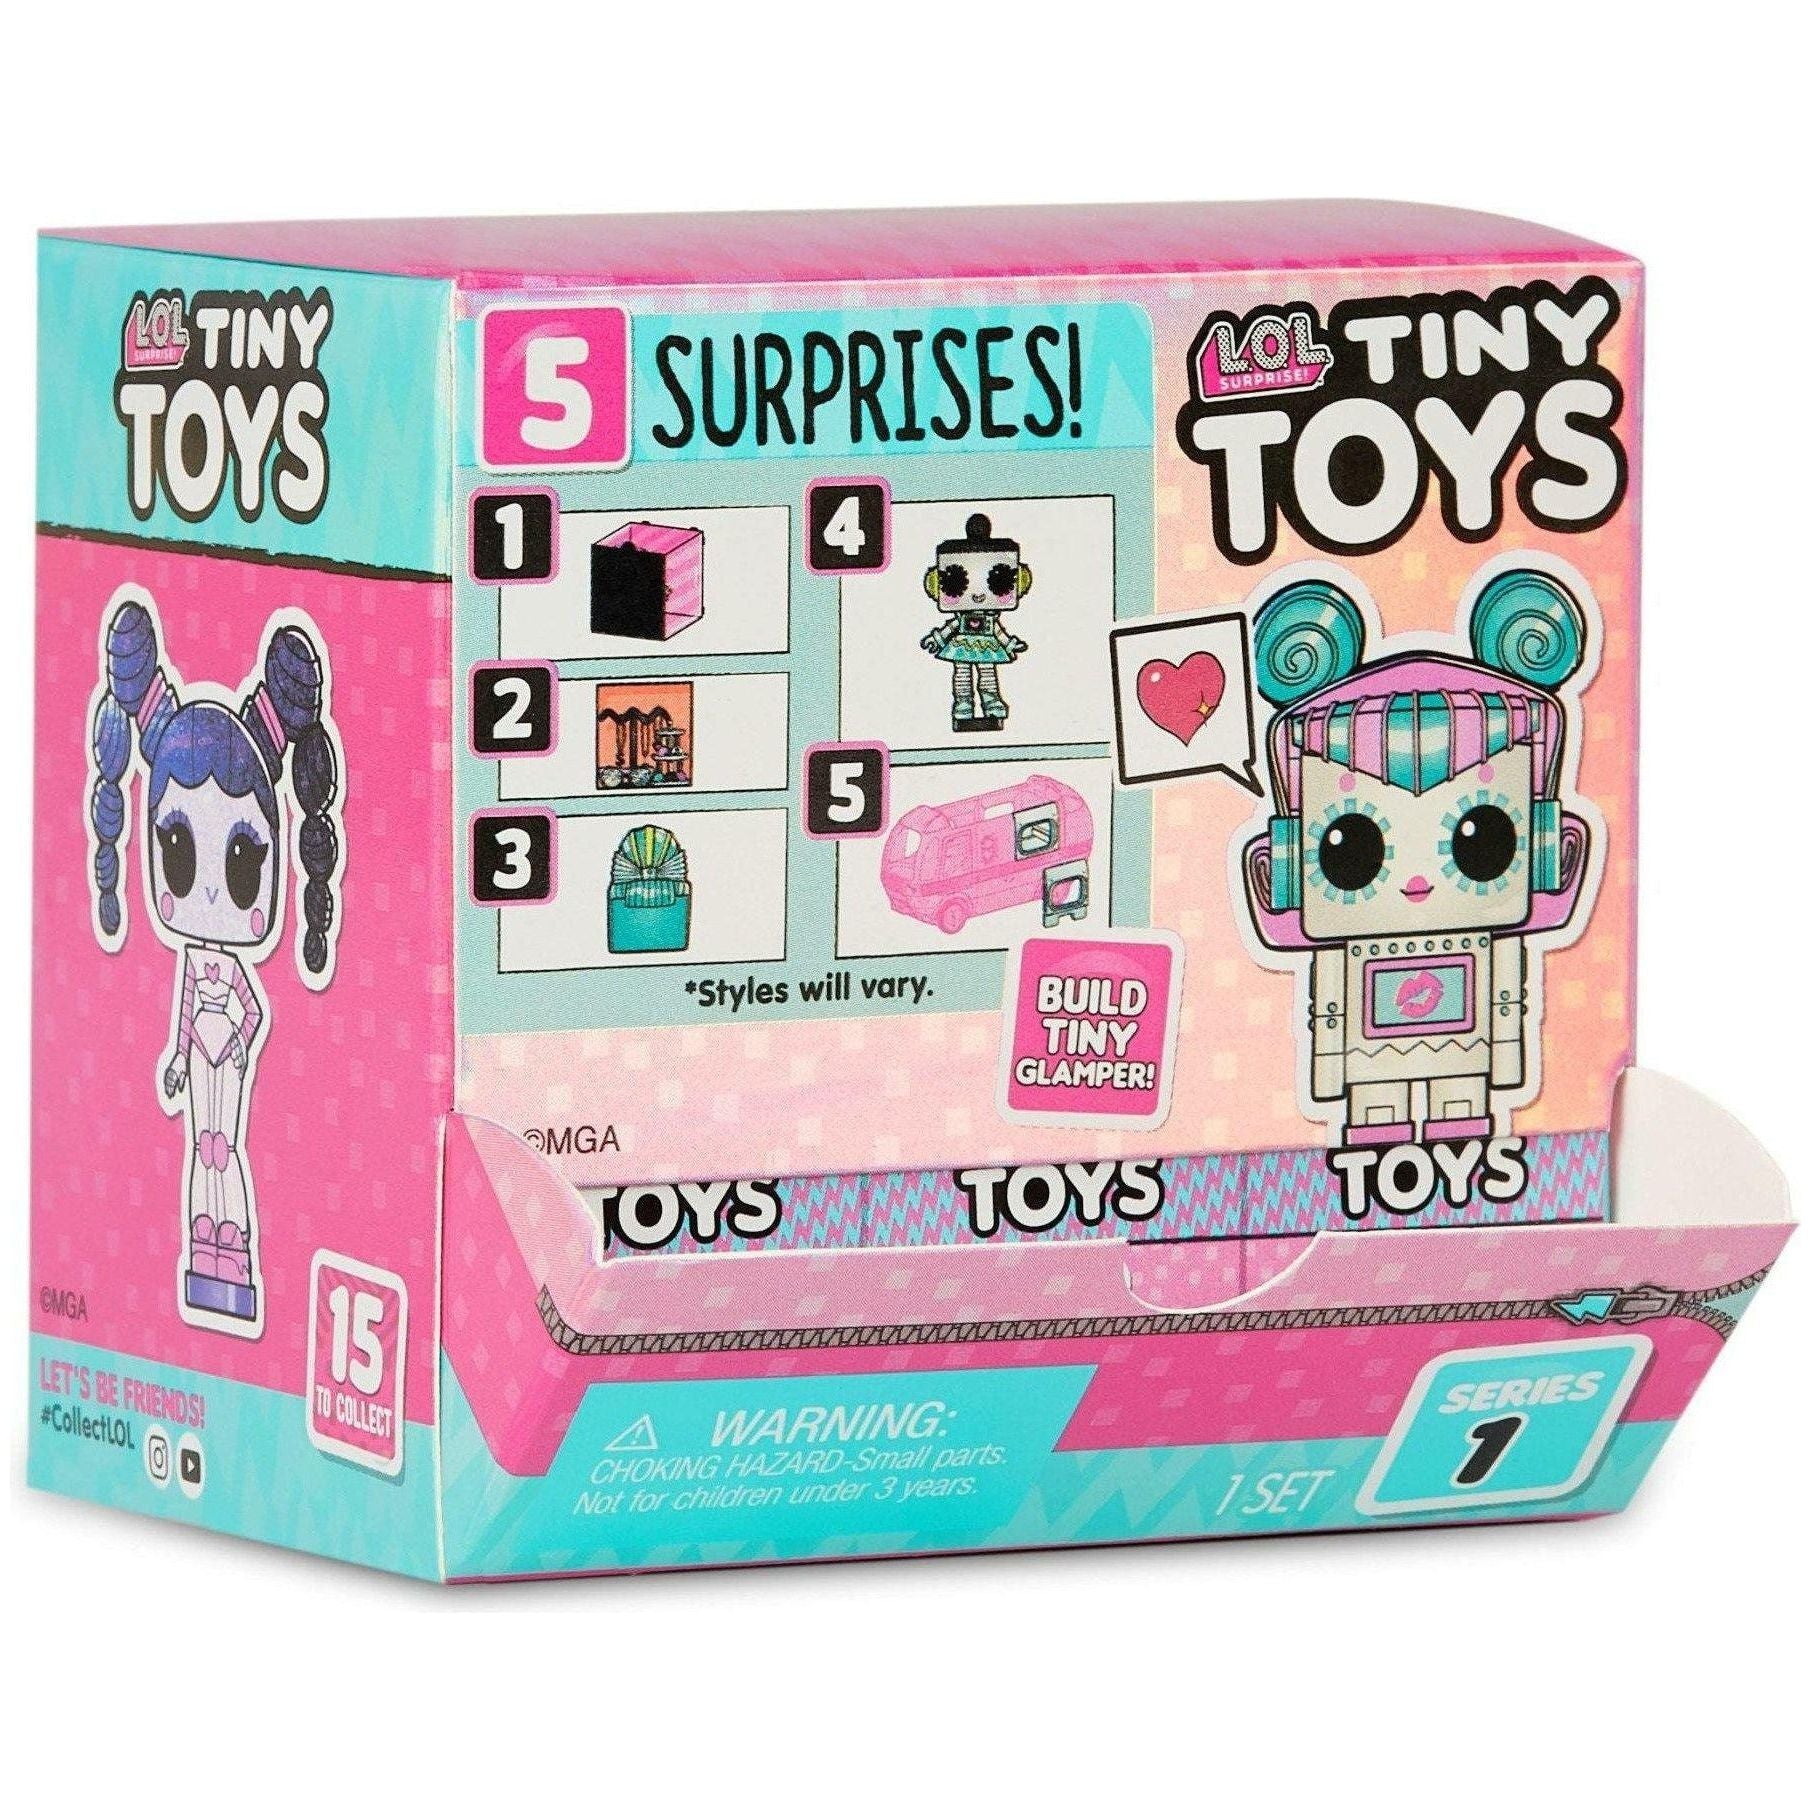 L.O.L Surprise Tiny Toys Series 1 With 5 Surprises - BumbleToys - 5-7 Years, Arabic Triangle Trading, Dolls, Fashion Dolls & Accessories, Girls, L.O.L